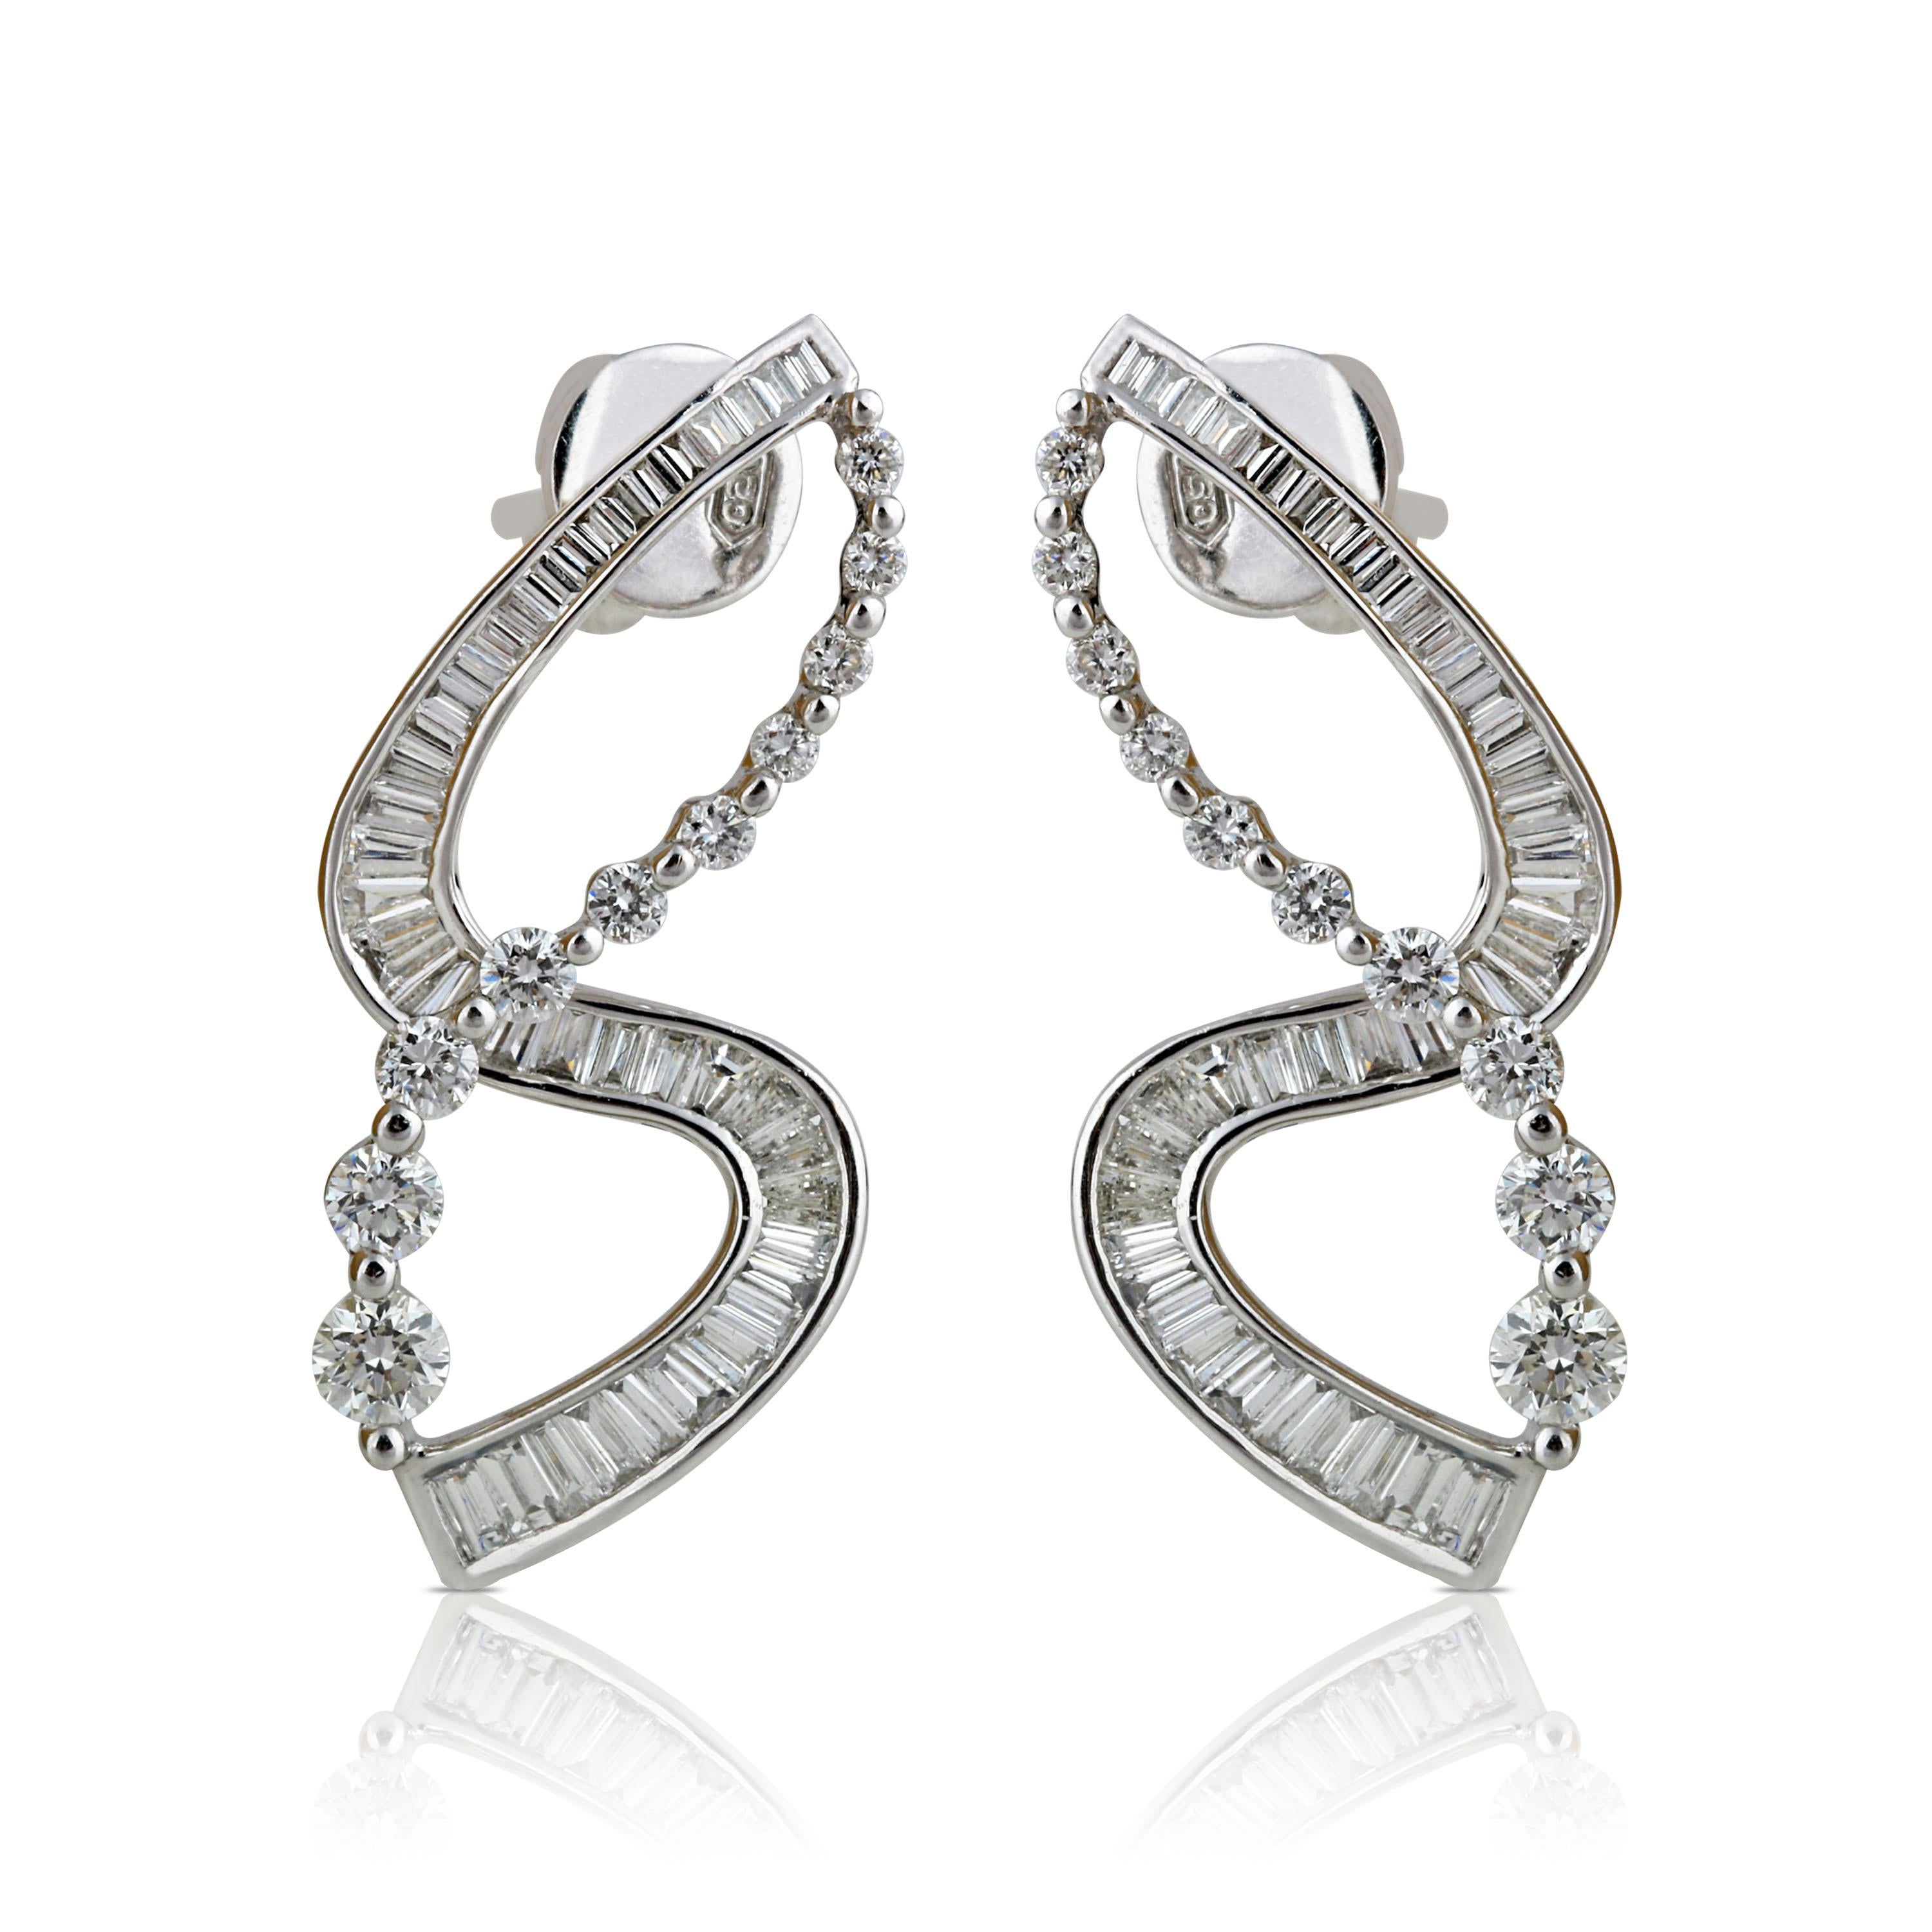 18K white gold and diamond earrings

Crafted with extreme precision in 18K white gold, these earrings with their unique design using round brilliant, baguettes and taper diamonds will perfectly pair with every look in your wardrobe. In a combination